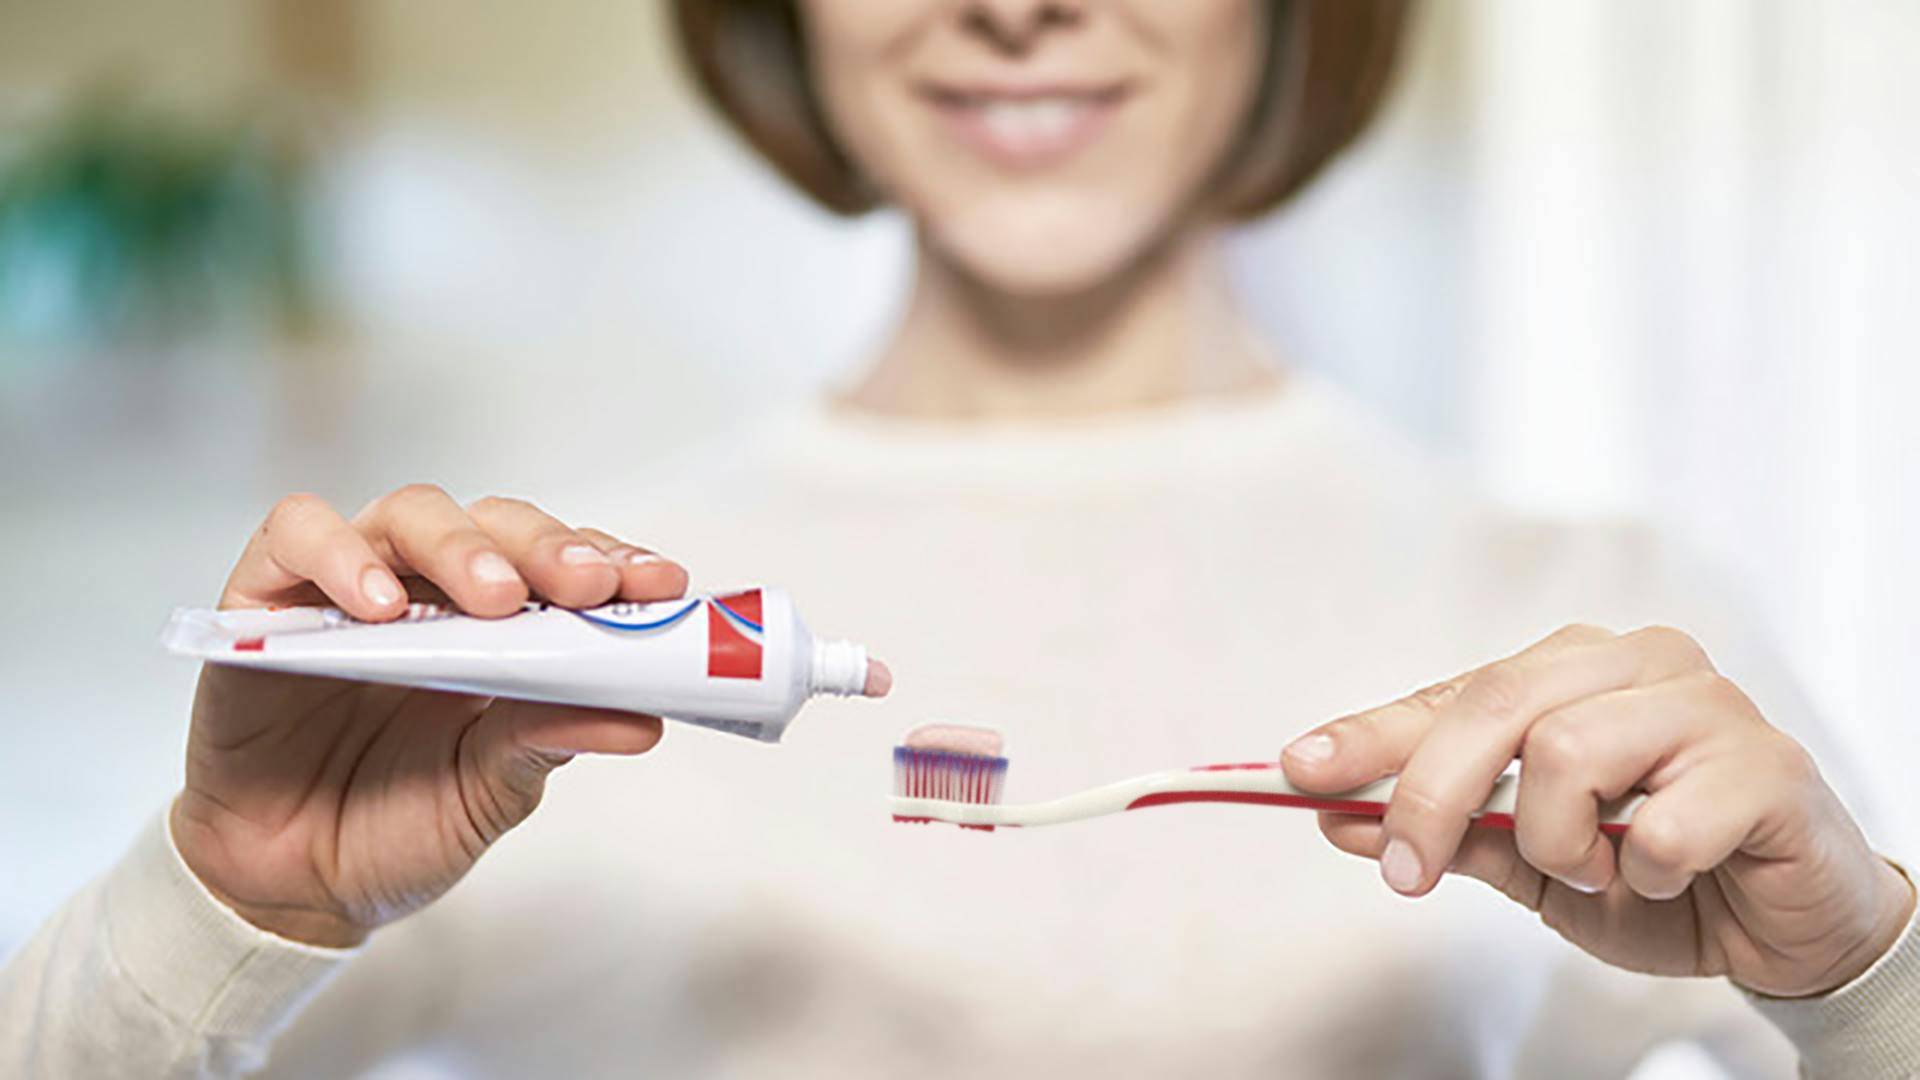 woman putting parodontax Complete Protection toothpaste onto a toothbrush